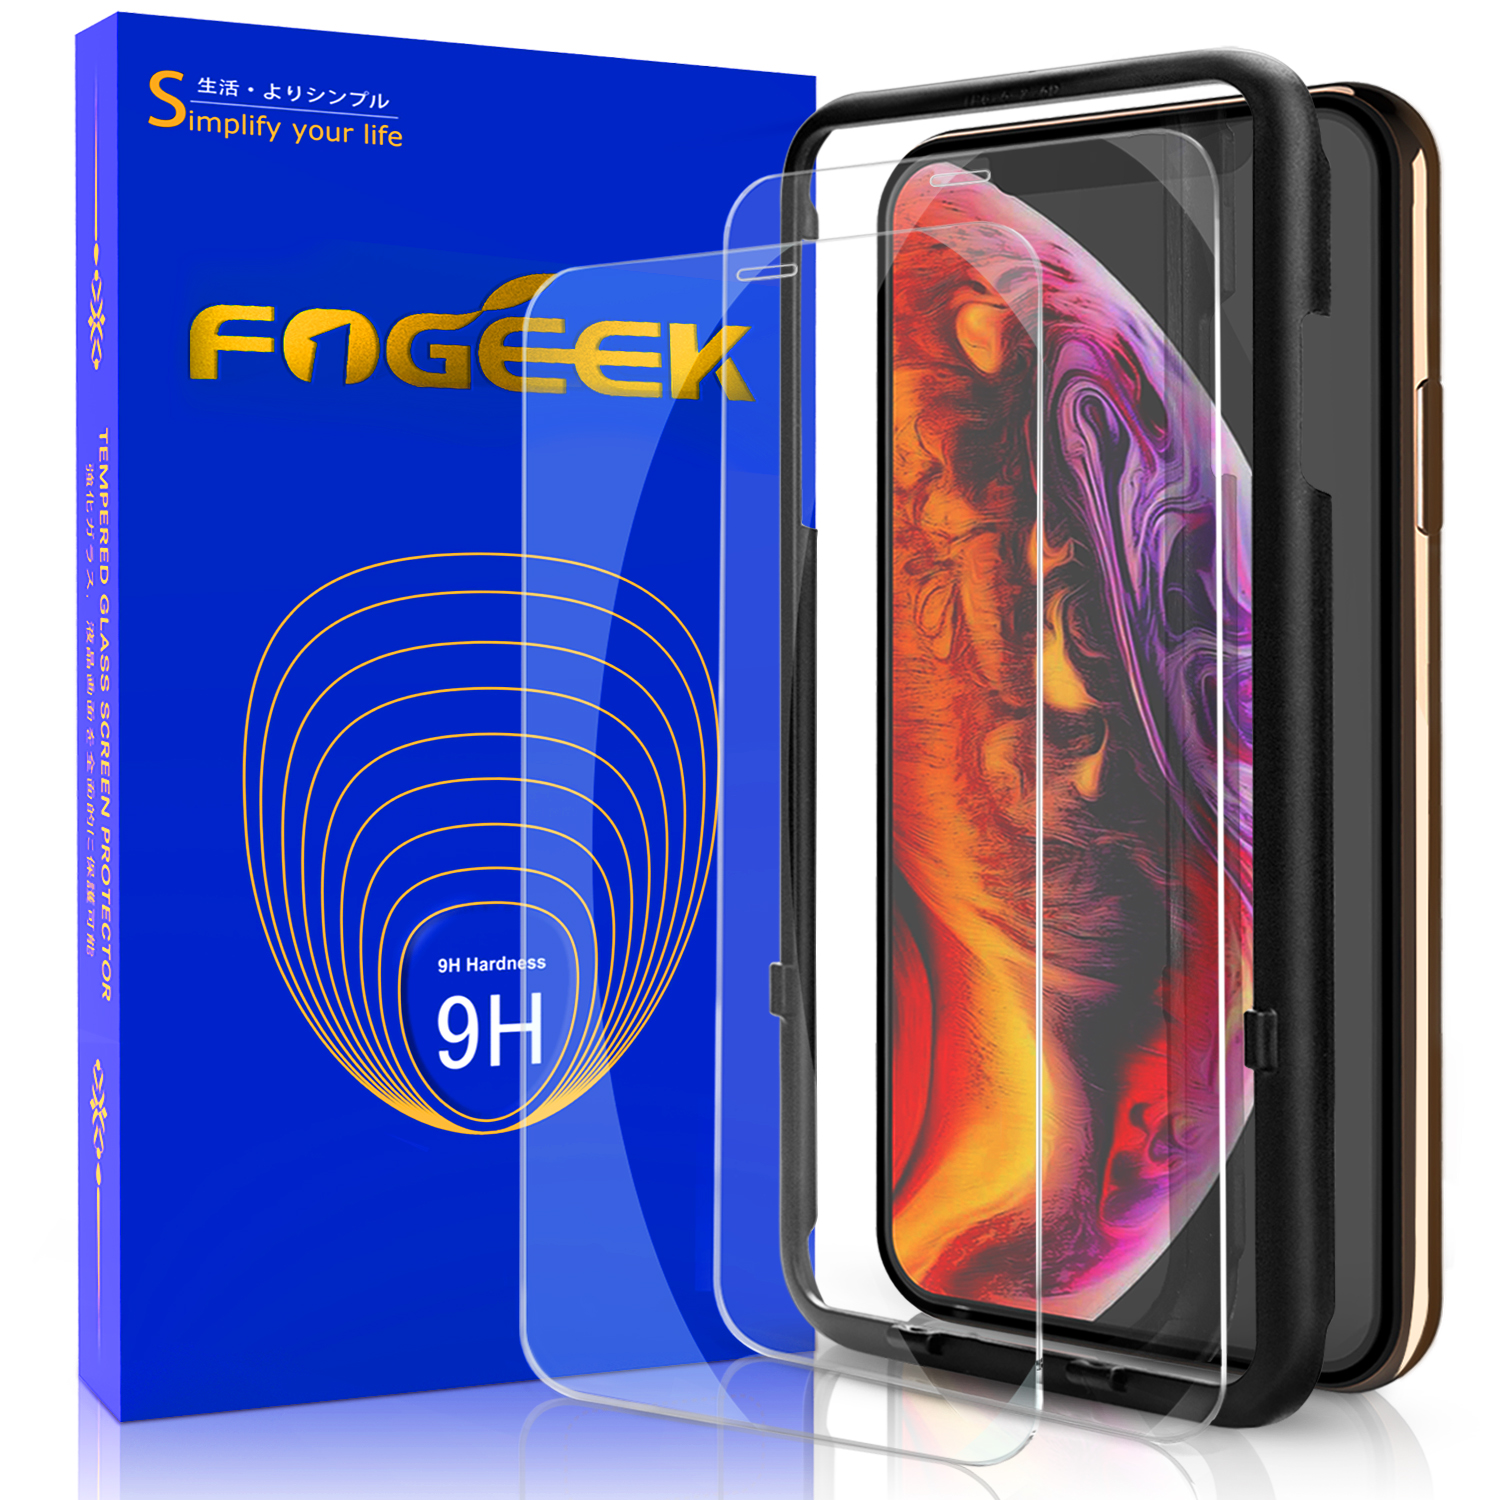 FOGEEK iPhone Xs Screen Protector,9H Hardness No White Edge iPhone X Glass Screen Protector [Case Friendly], UPC:712190069971